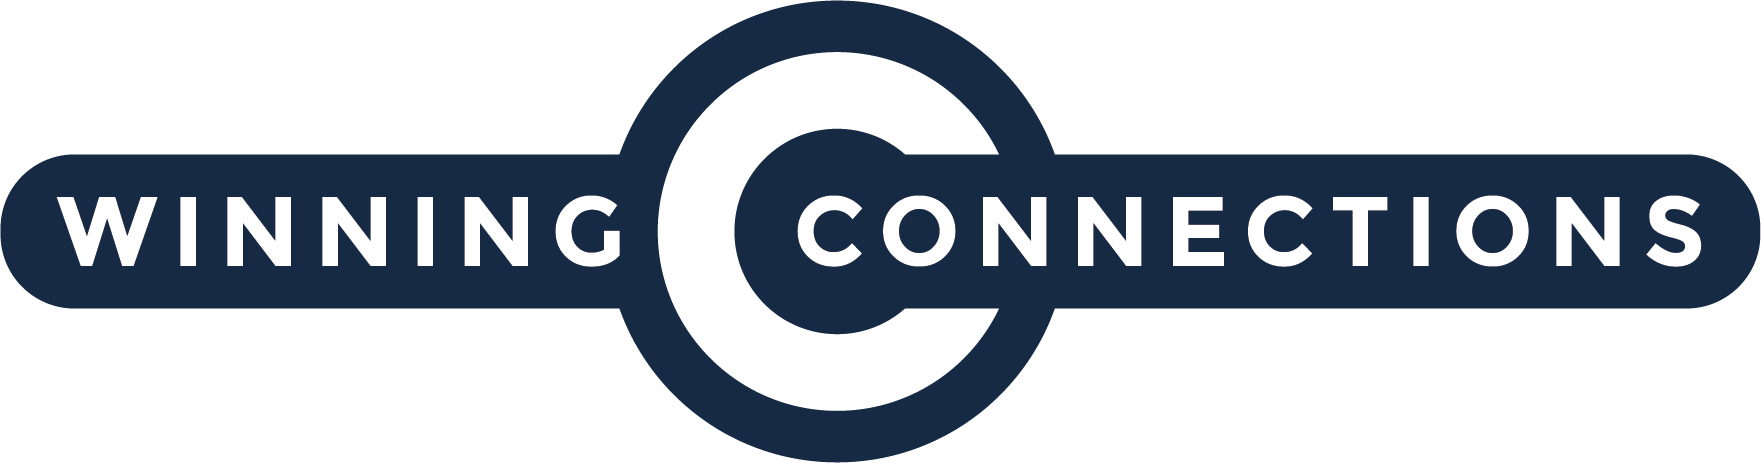 Winning Connections Logo-Blue